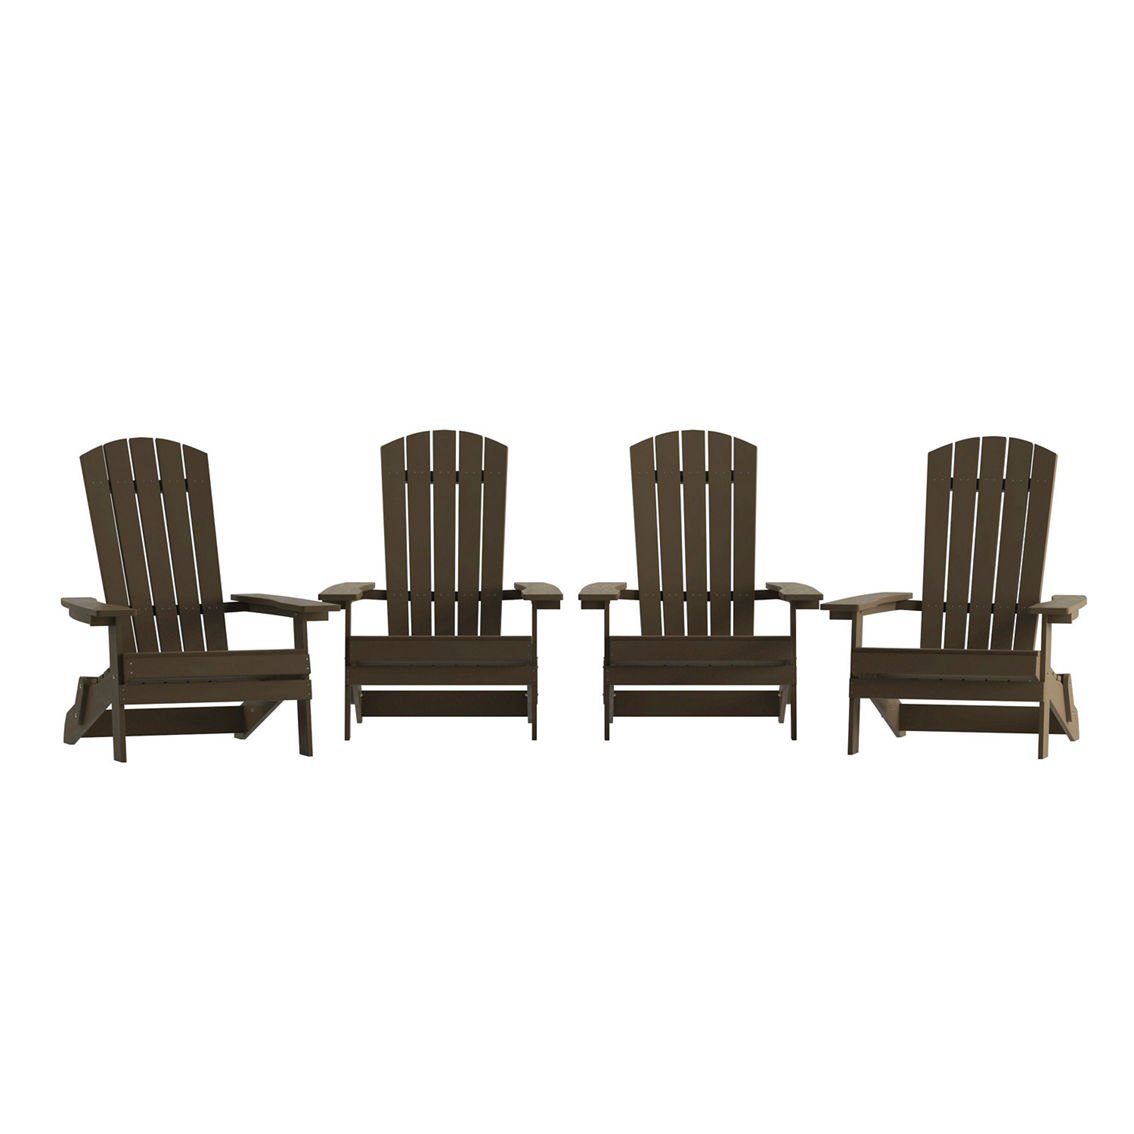 Flash Furniture 4 Pack All-Weather Folding Adirondack Chairs - Image 5 of 5